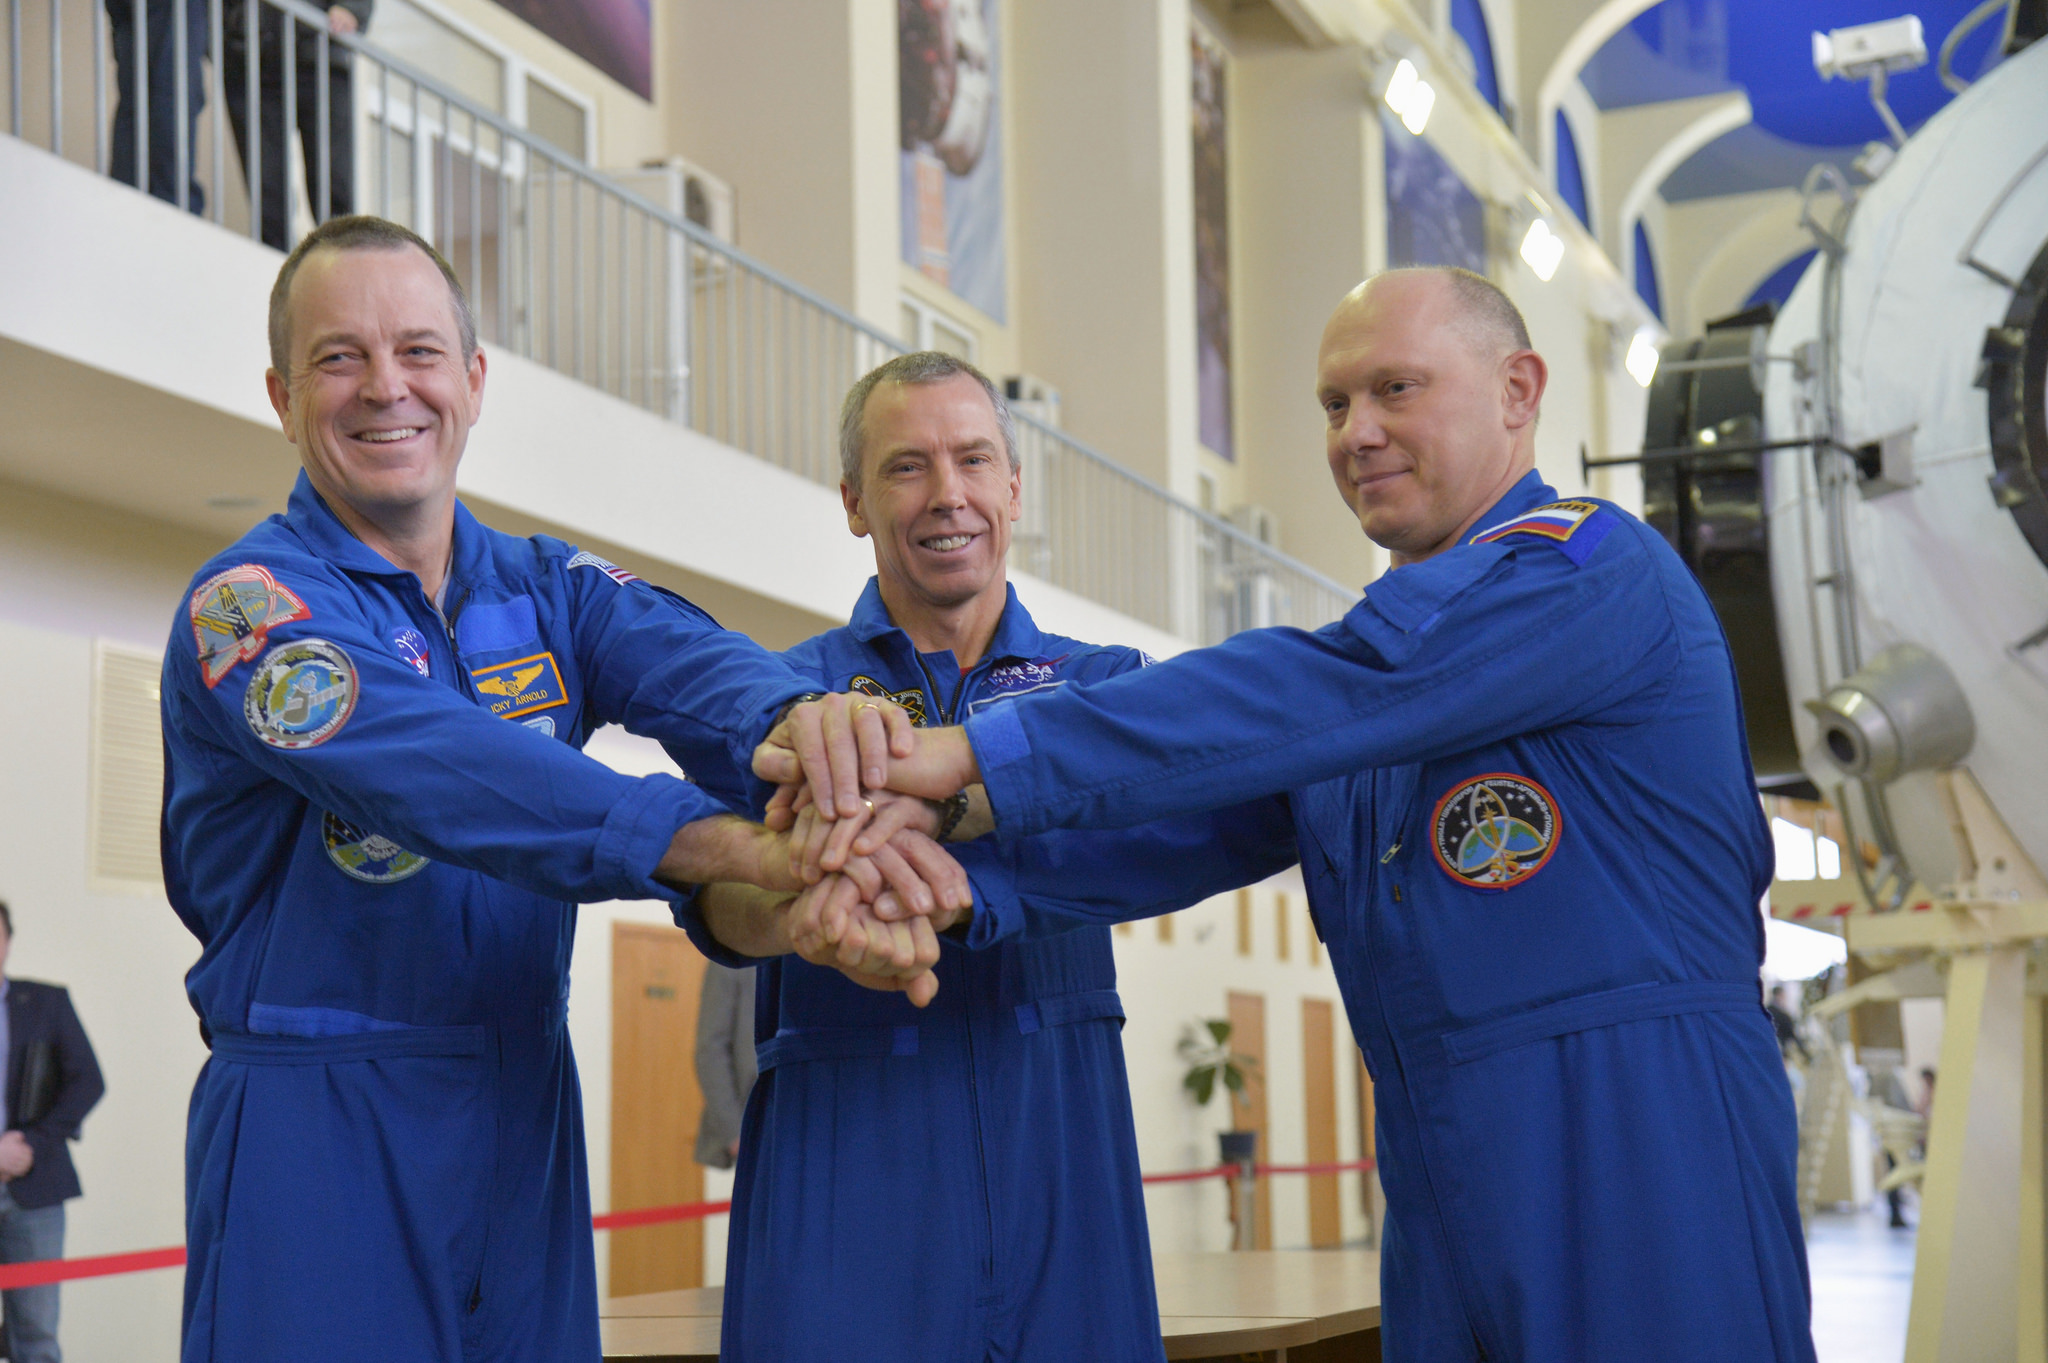 NASA astronauts Drew Feustel and Ricky Arnold, and cosmonaut Oleg Artemyev of the Russian space agency Roscosmos.